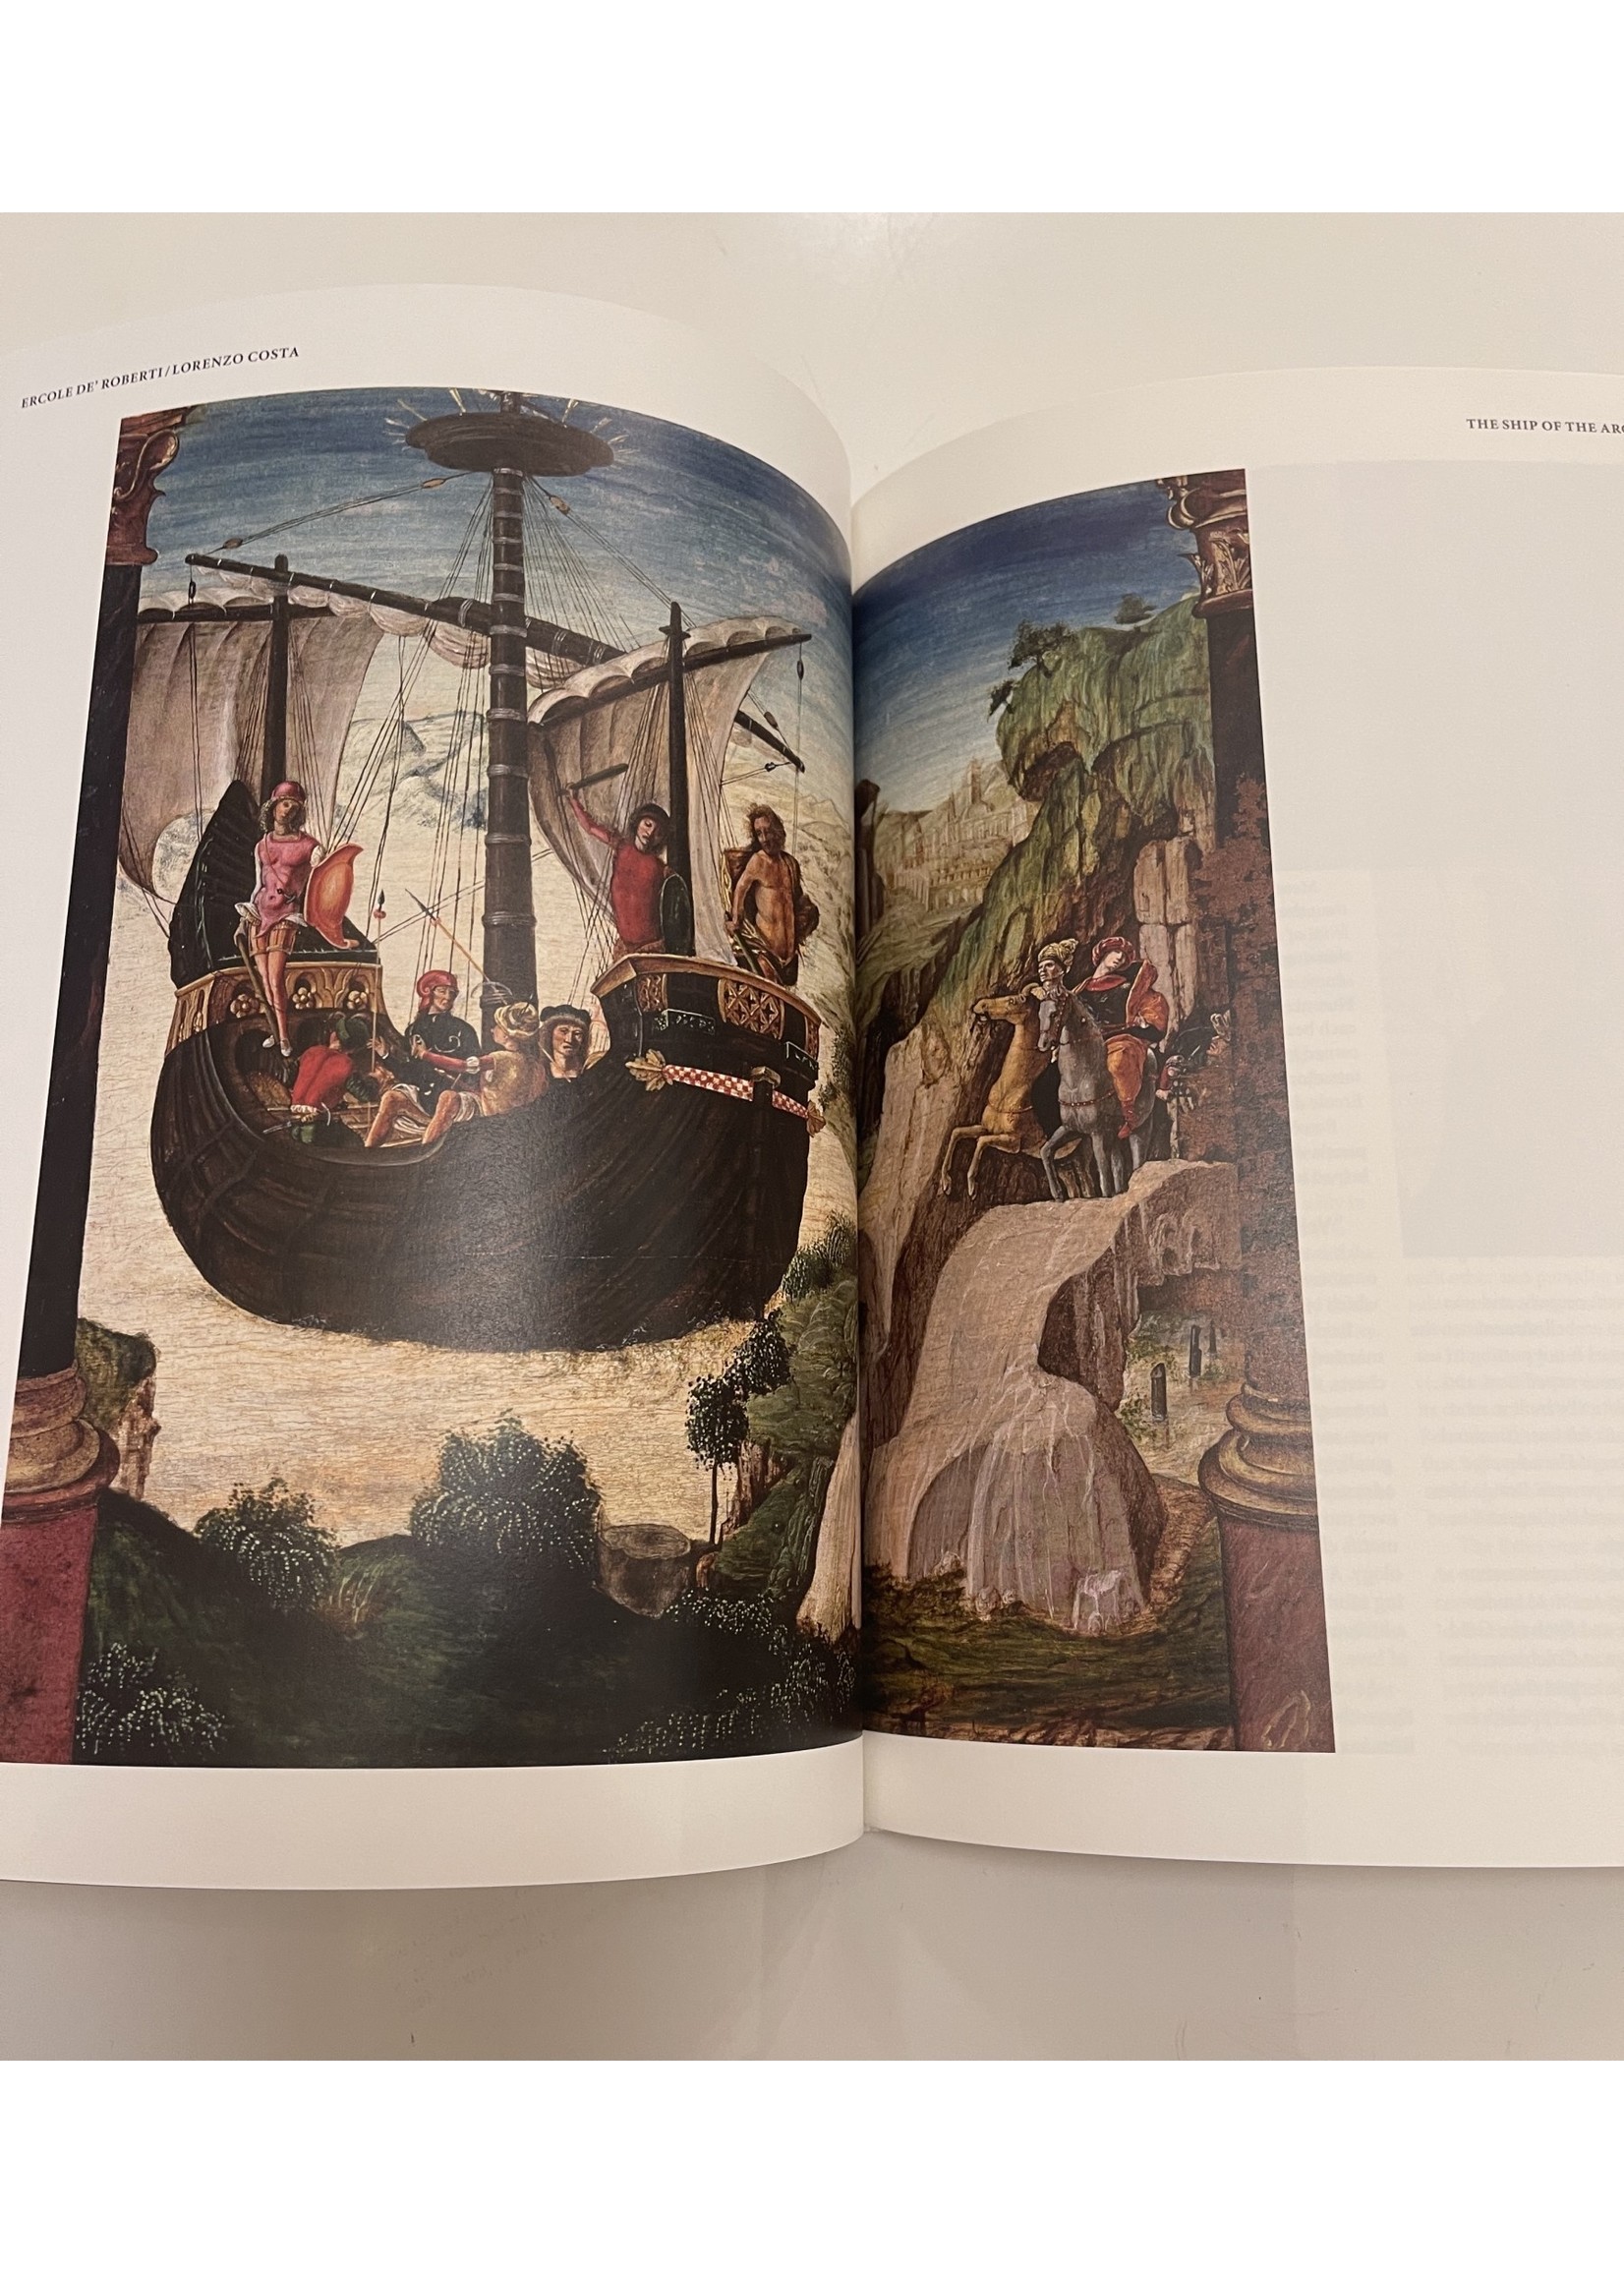 Taschen Books What Great Paintings Say - Italian Renaissance Book